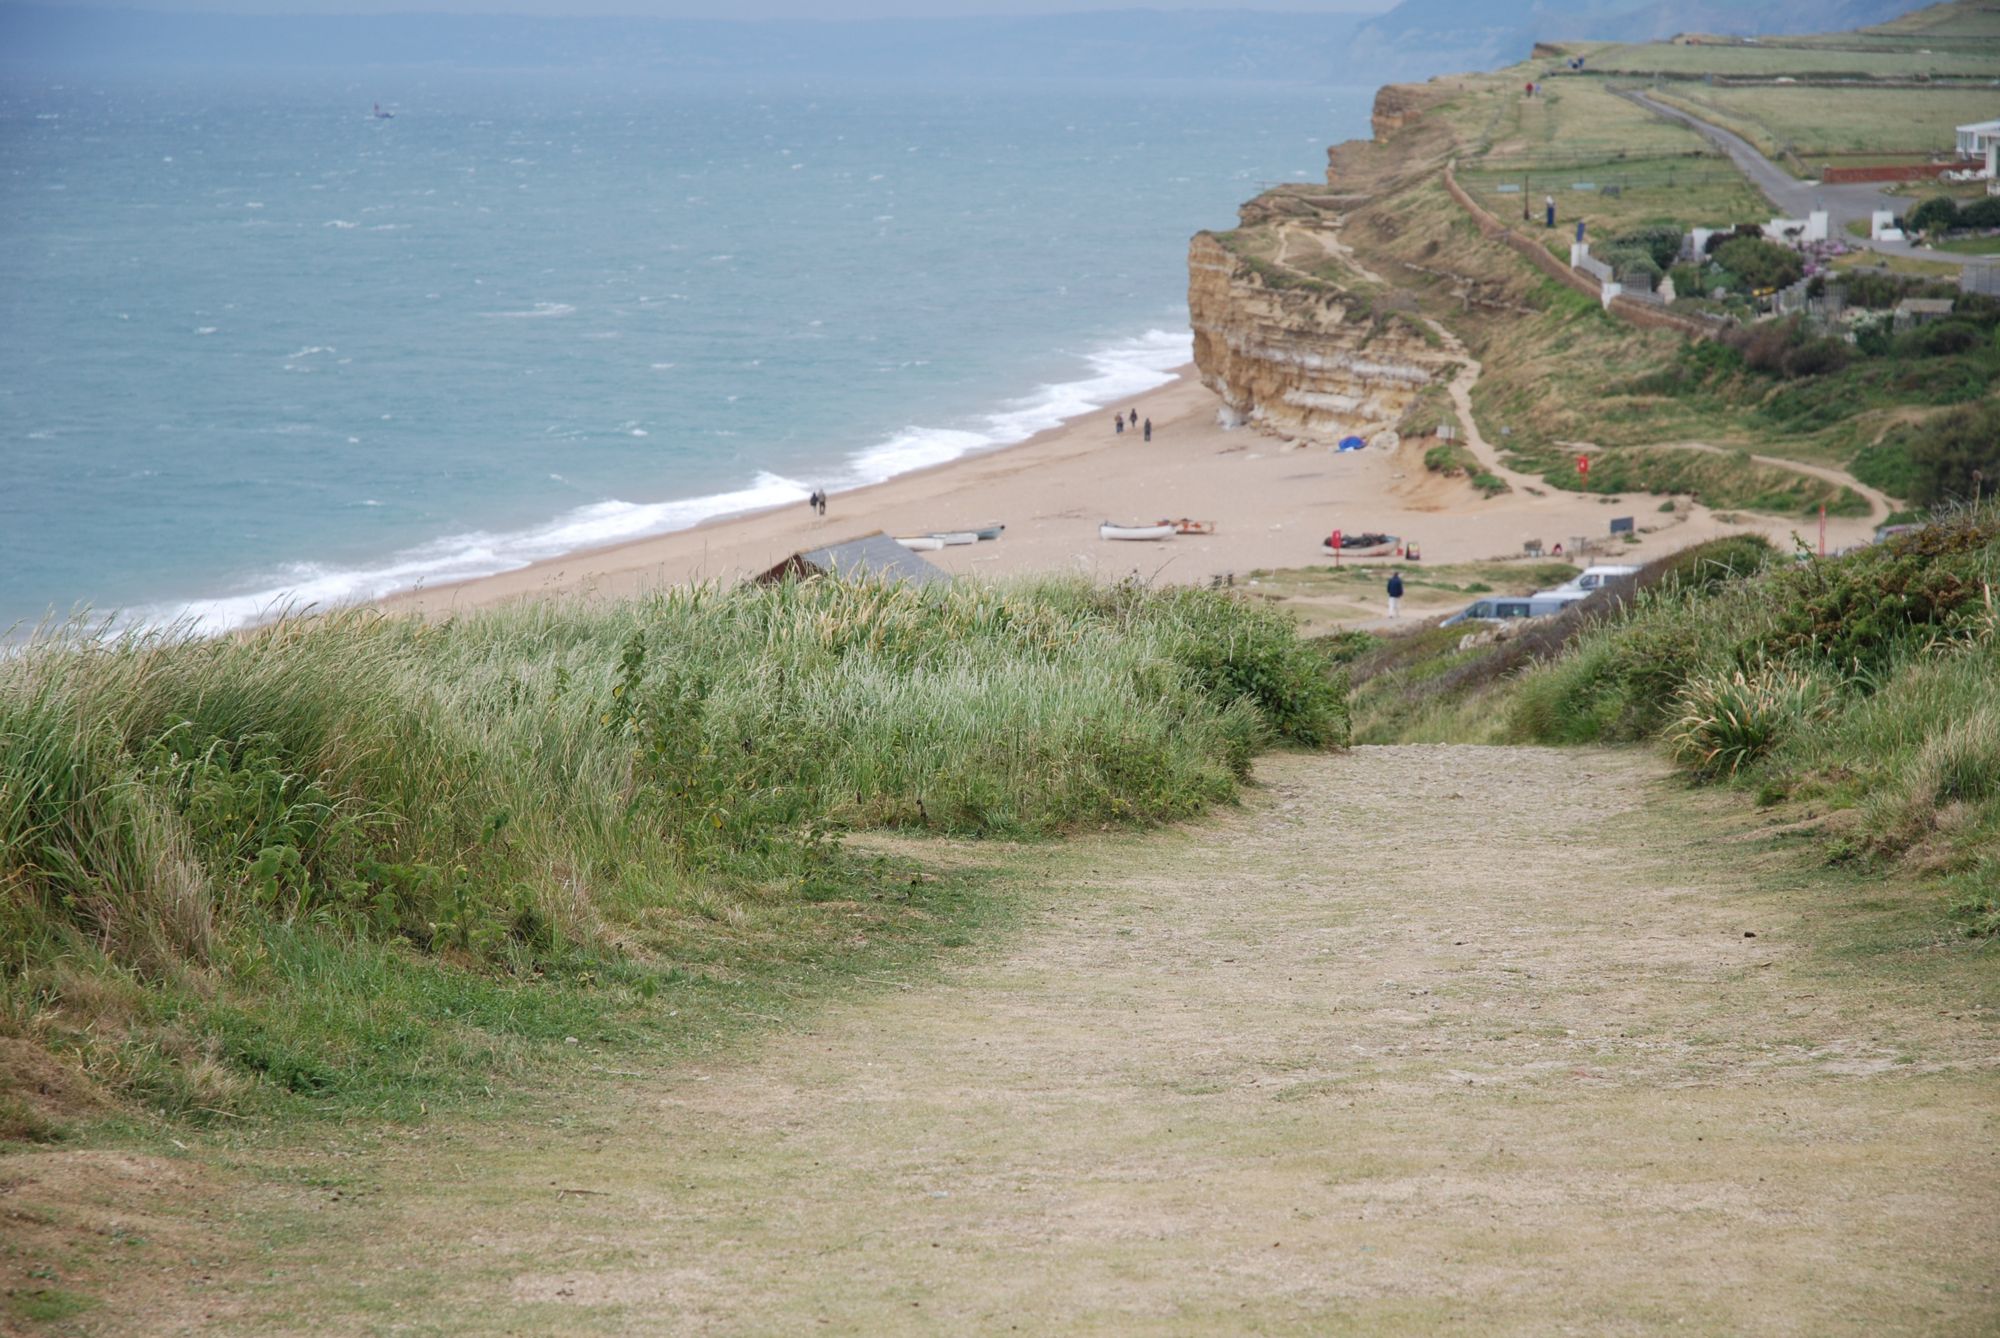 Hotels, Cottages, B&Bs & Glamping in West Dorset